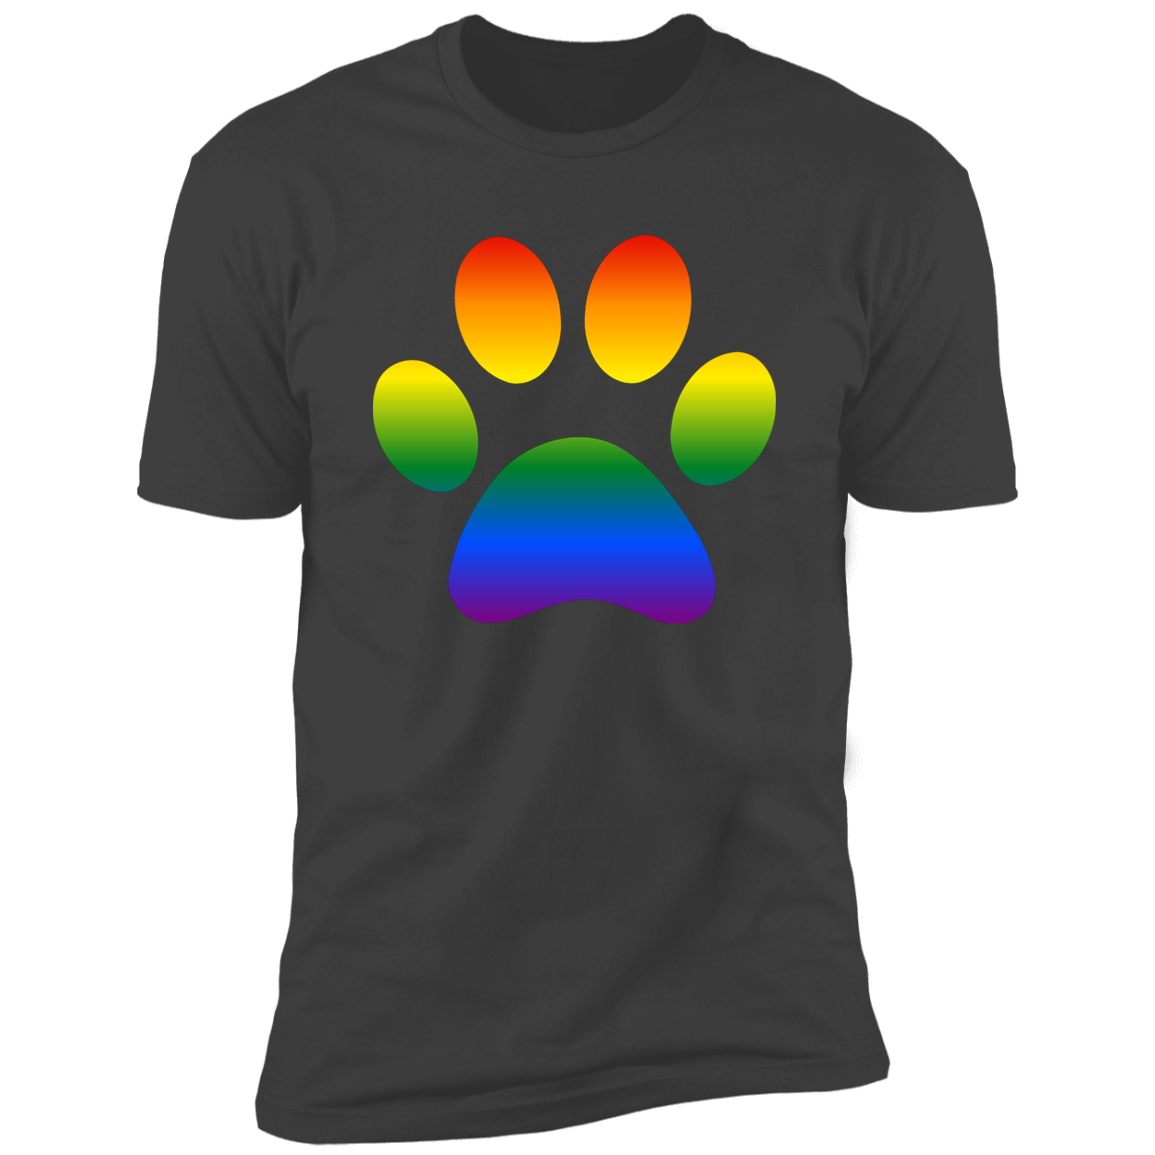 Dog paw Pride, Dog Pride shirt for humas, in heavy metal gray